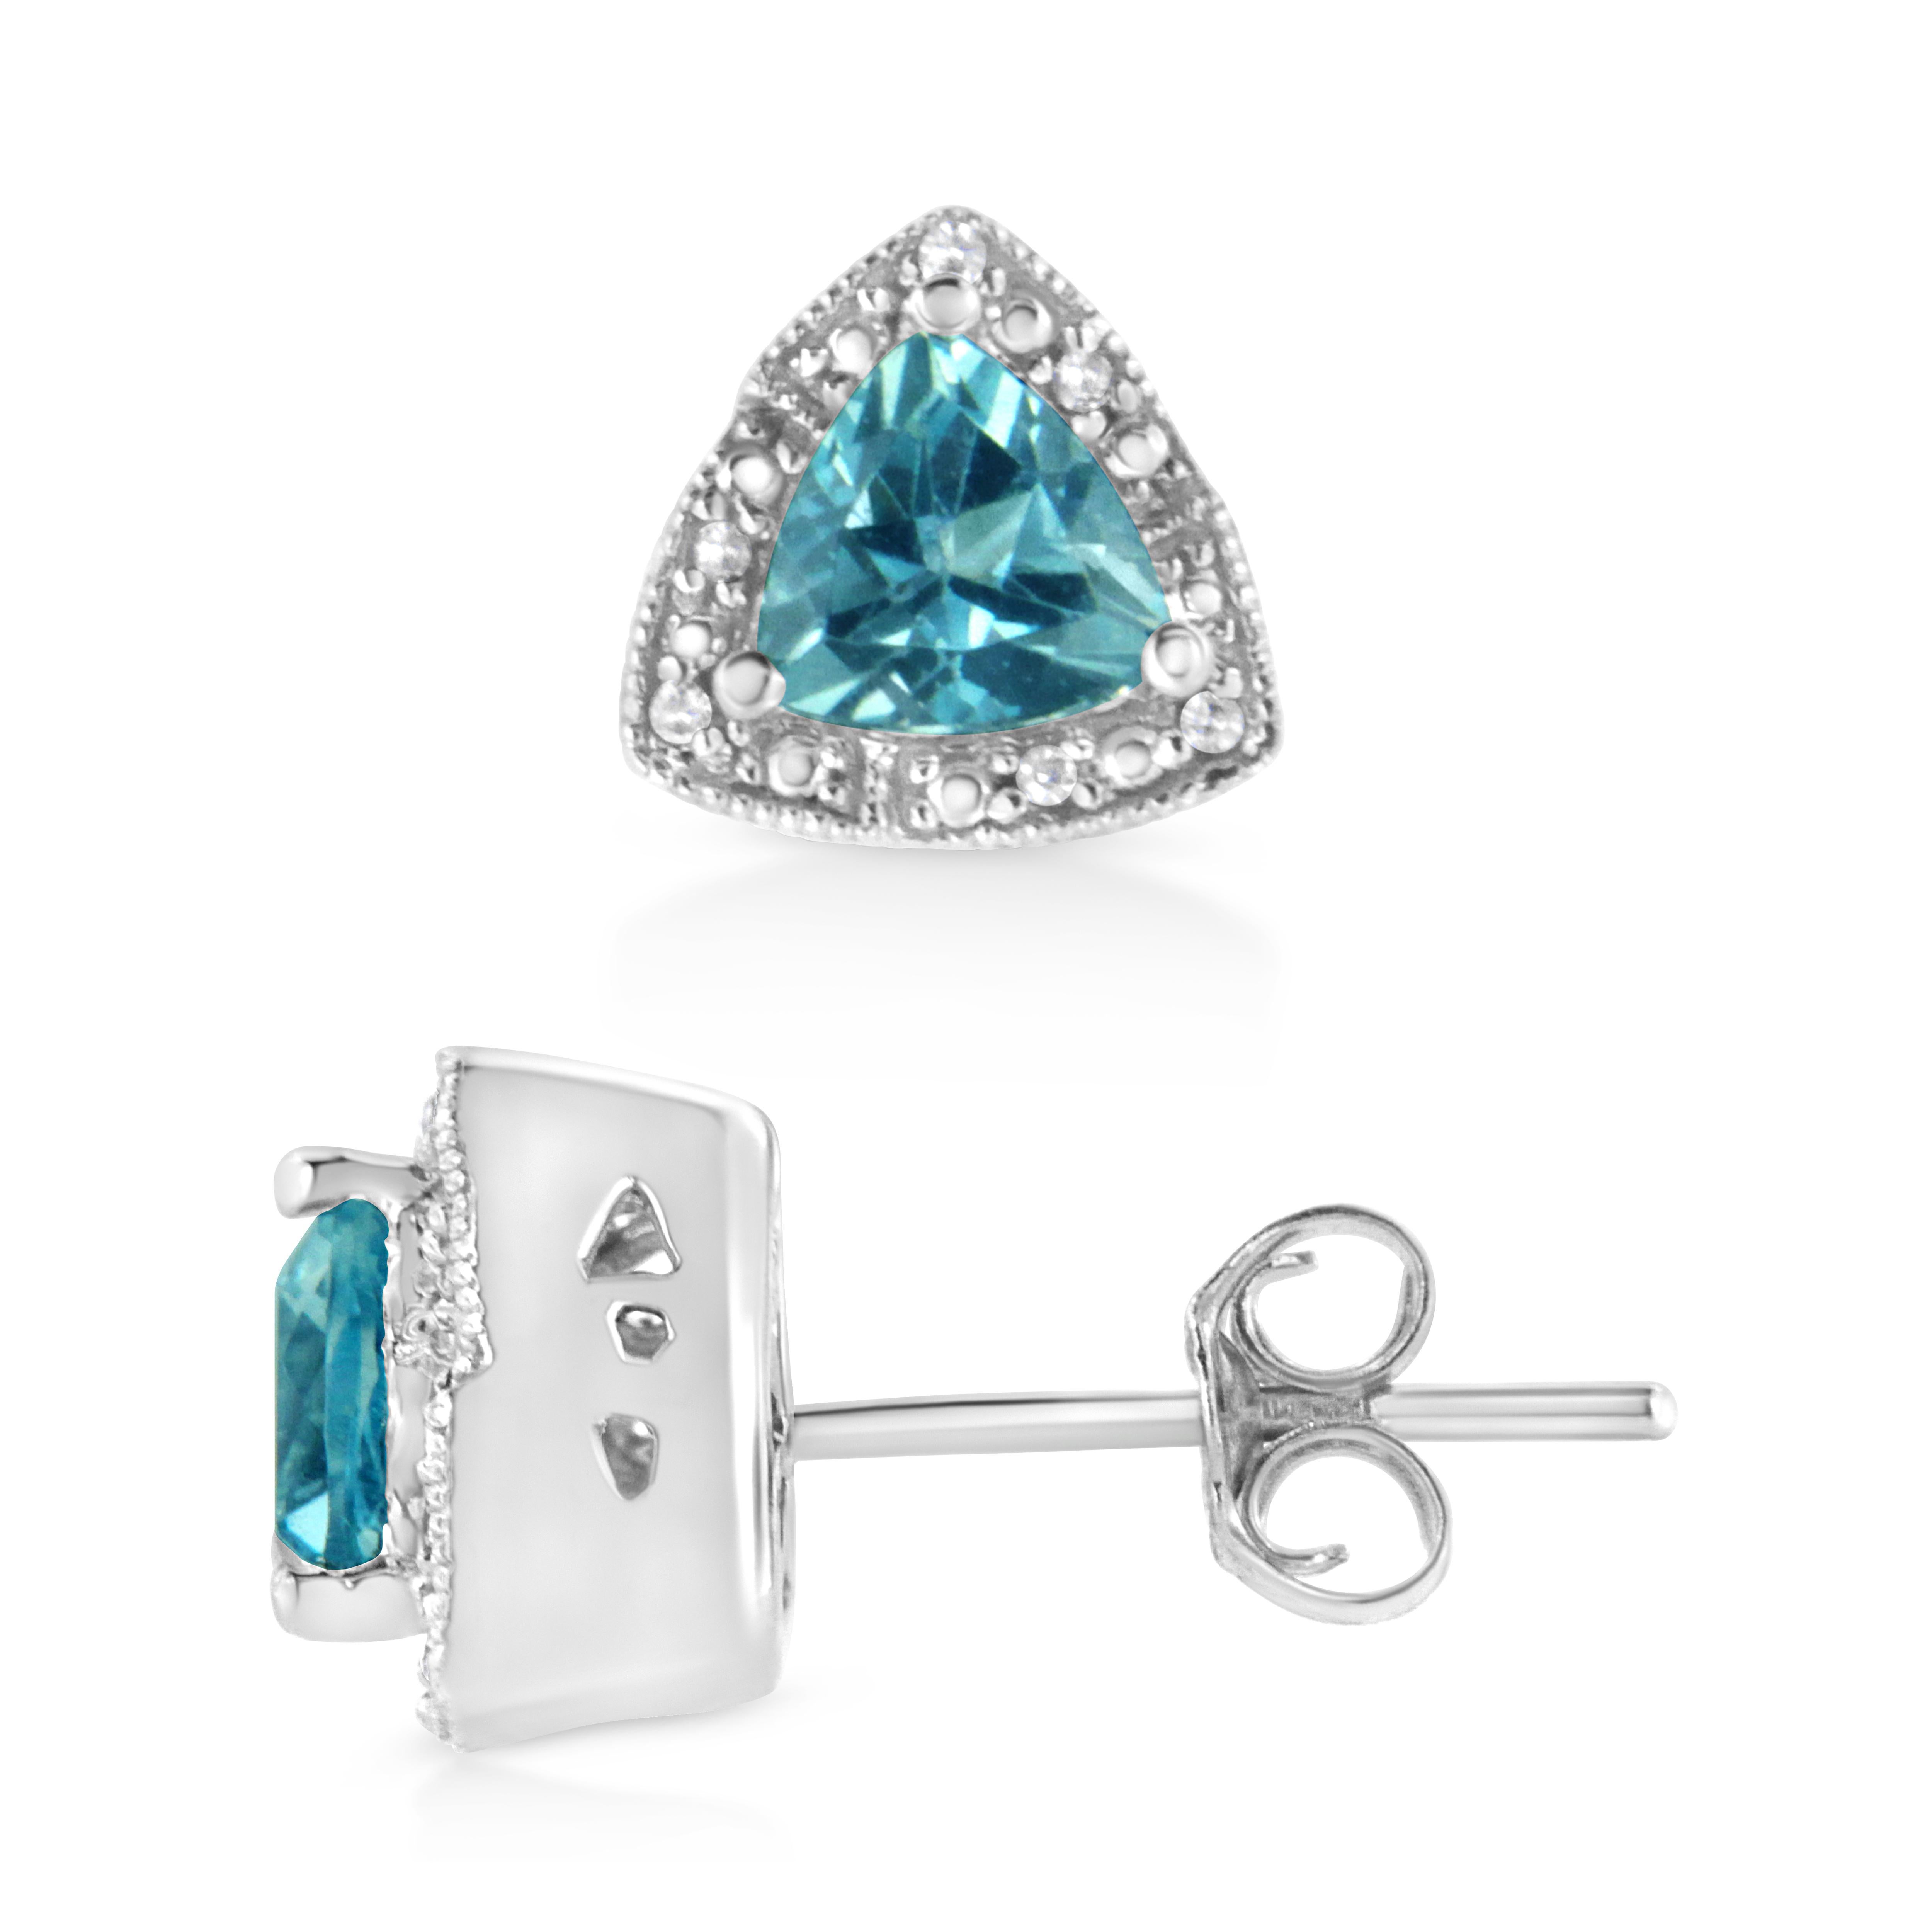 Give these enchanting pair of blue topaz and diamond earrings to the one you desire. These earrings showcases a centrally staged gorgeous trillion cut prong set blue topaz dramatically haloed by 12 single cut diamonds, beautifully prong set and